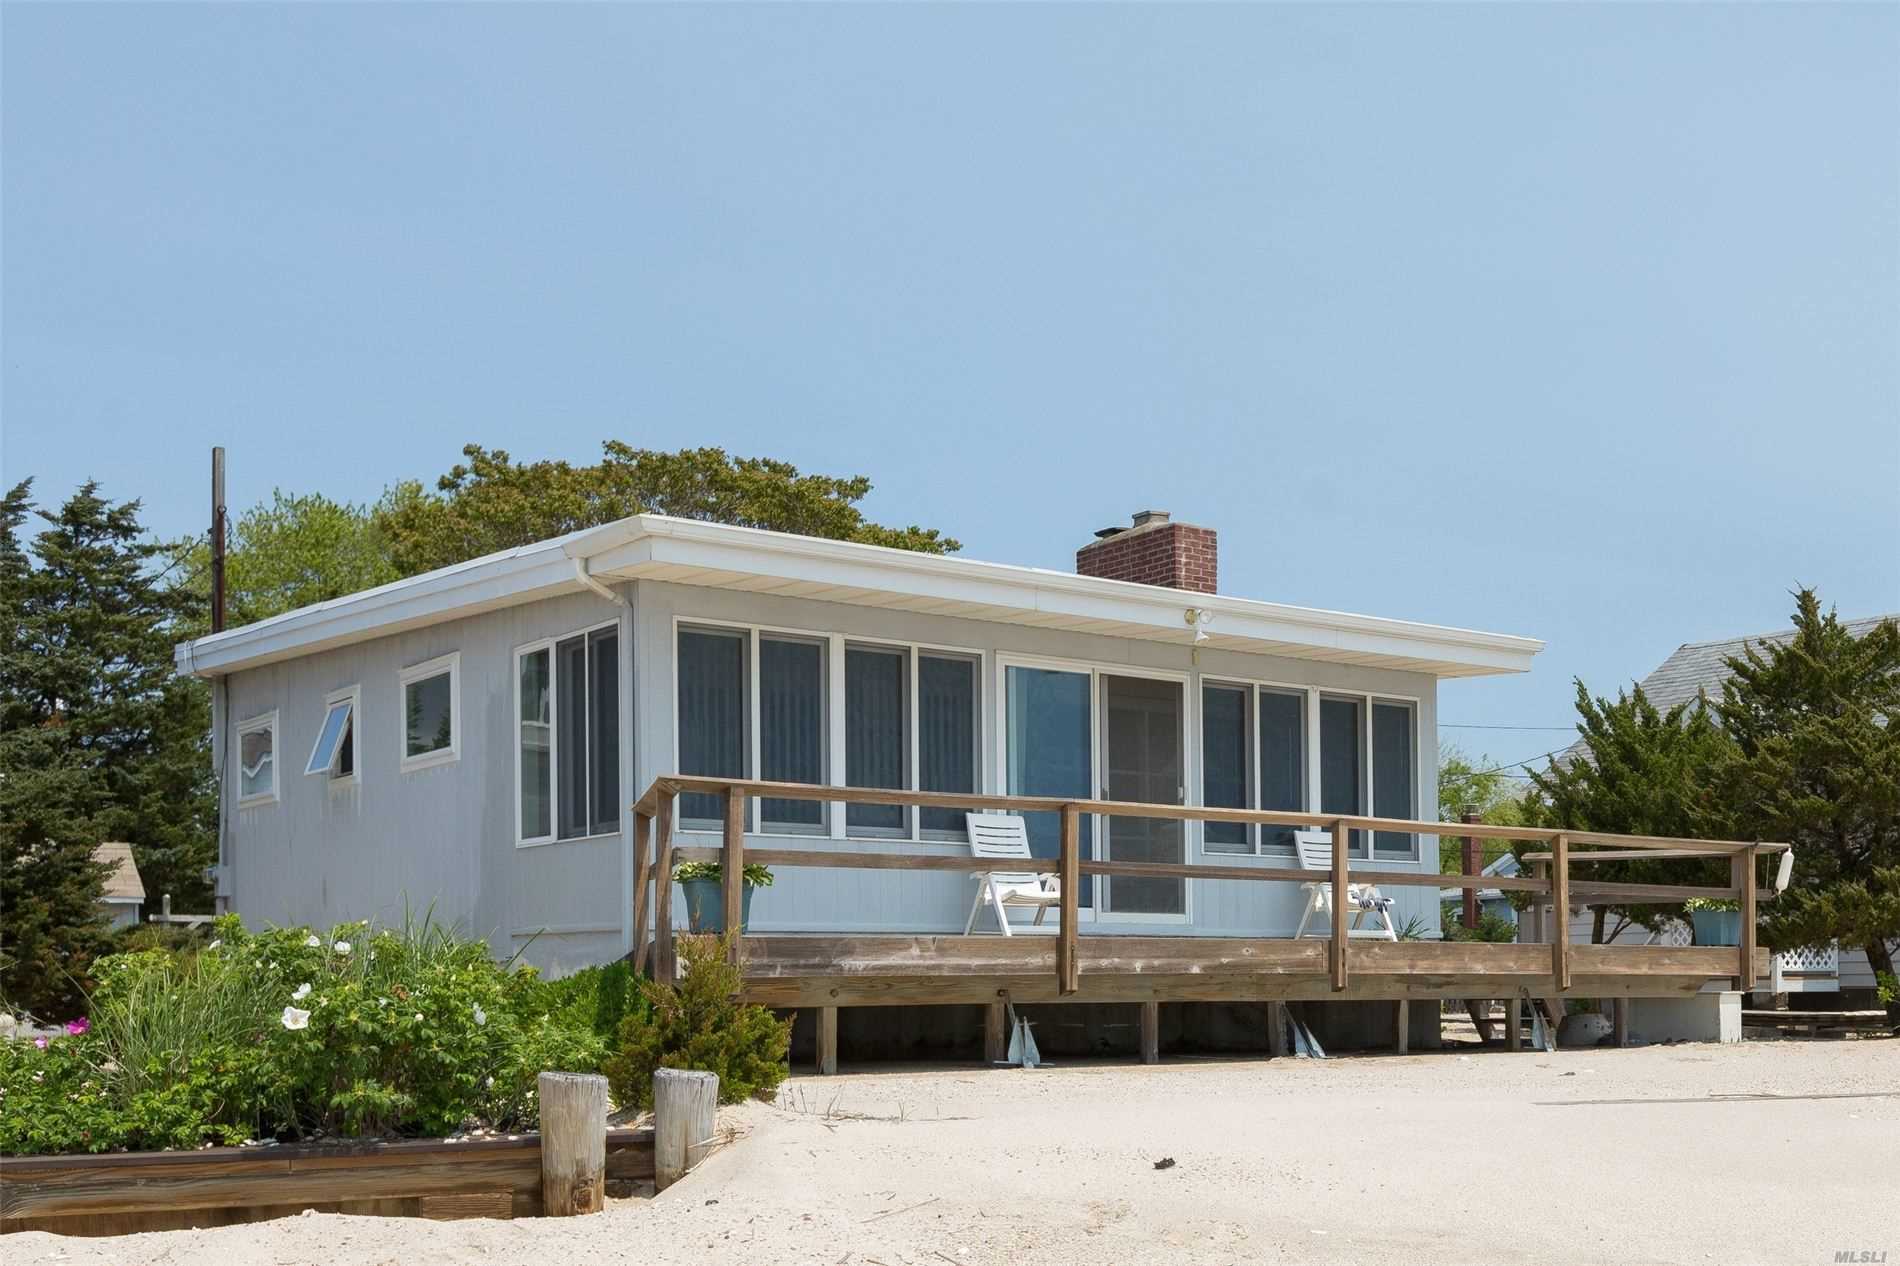 This is your waterfront location! Step outside your back porch and feel the sand between your toes with views straight across to the Hamptons. Fabulous location, great potential to make this property your dream home. Lovely cottage for your weekend get-away!!!